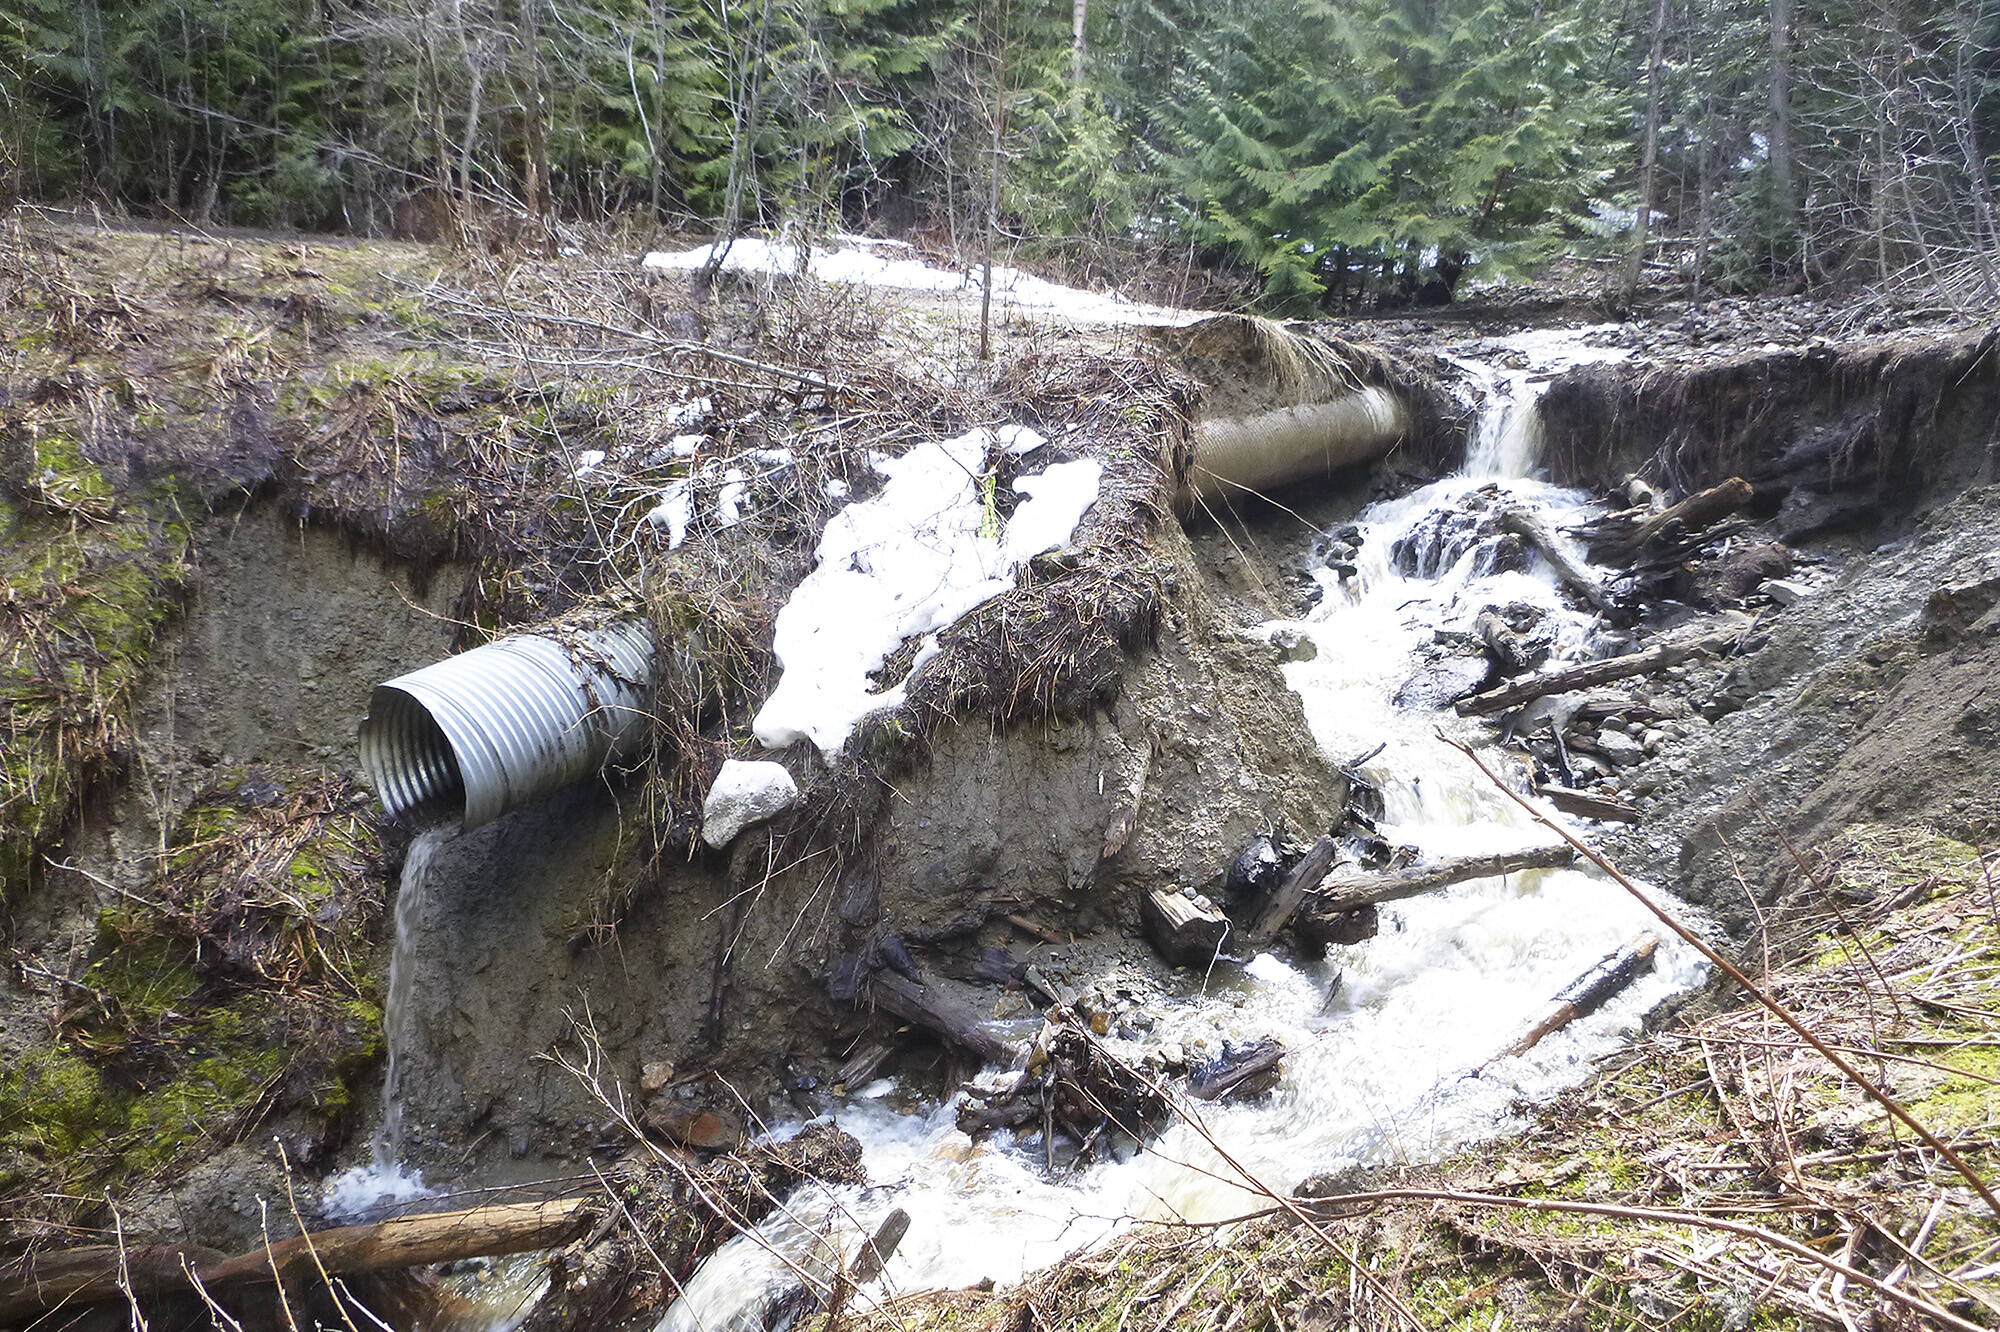 This washout in May 2017 resulted in damage to Foothill Road and surrounding properties in Salmon Arm. (File photo)